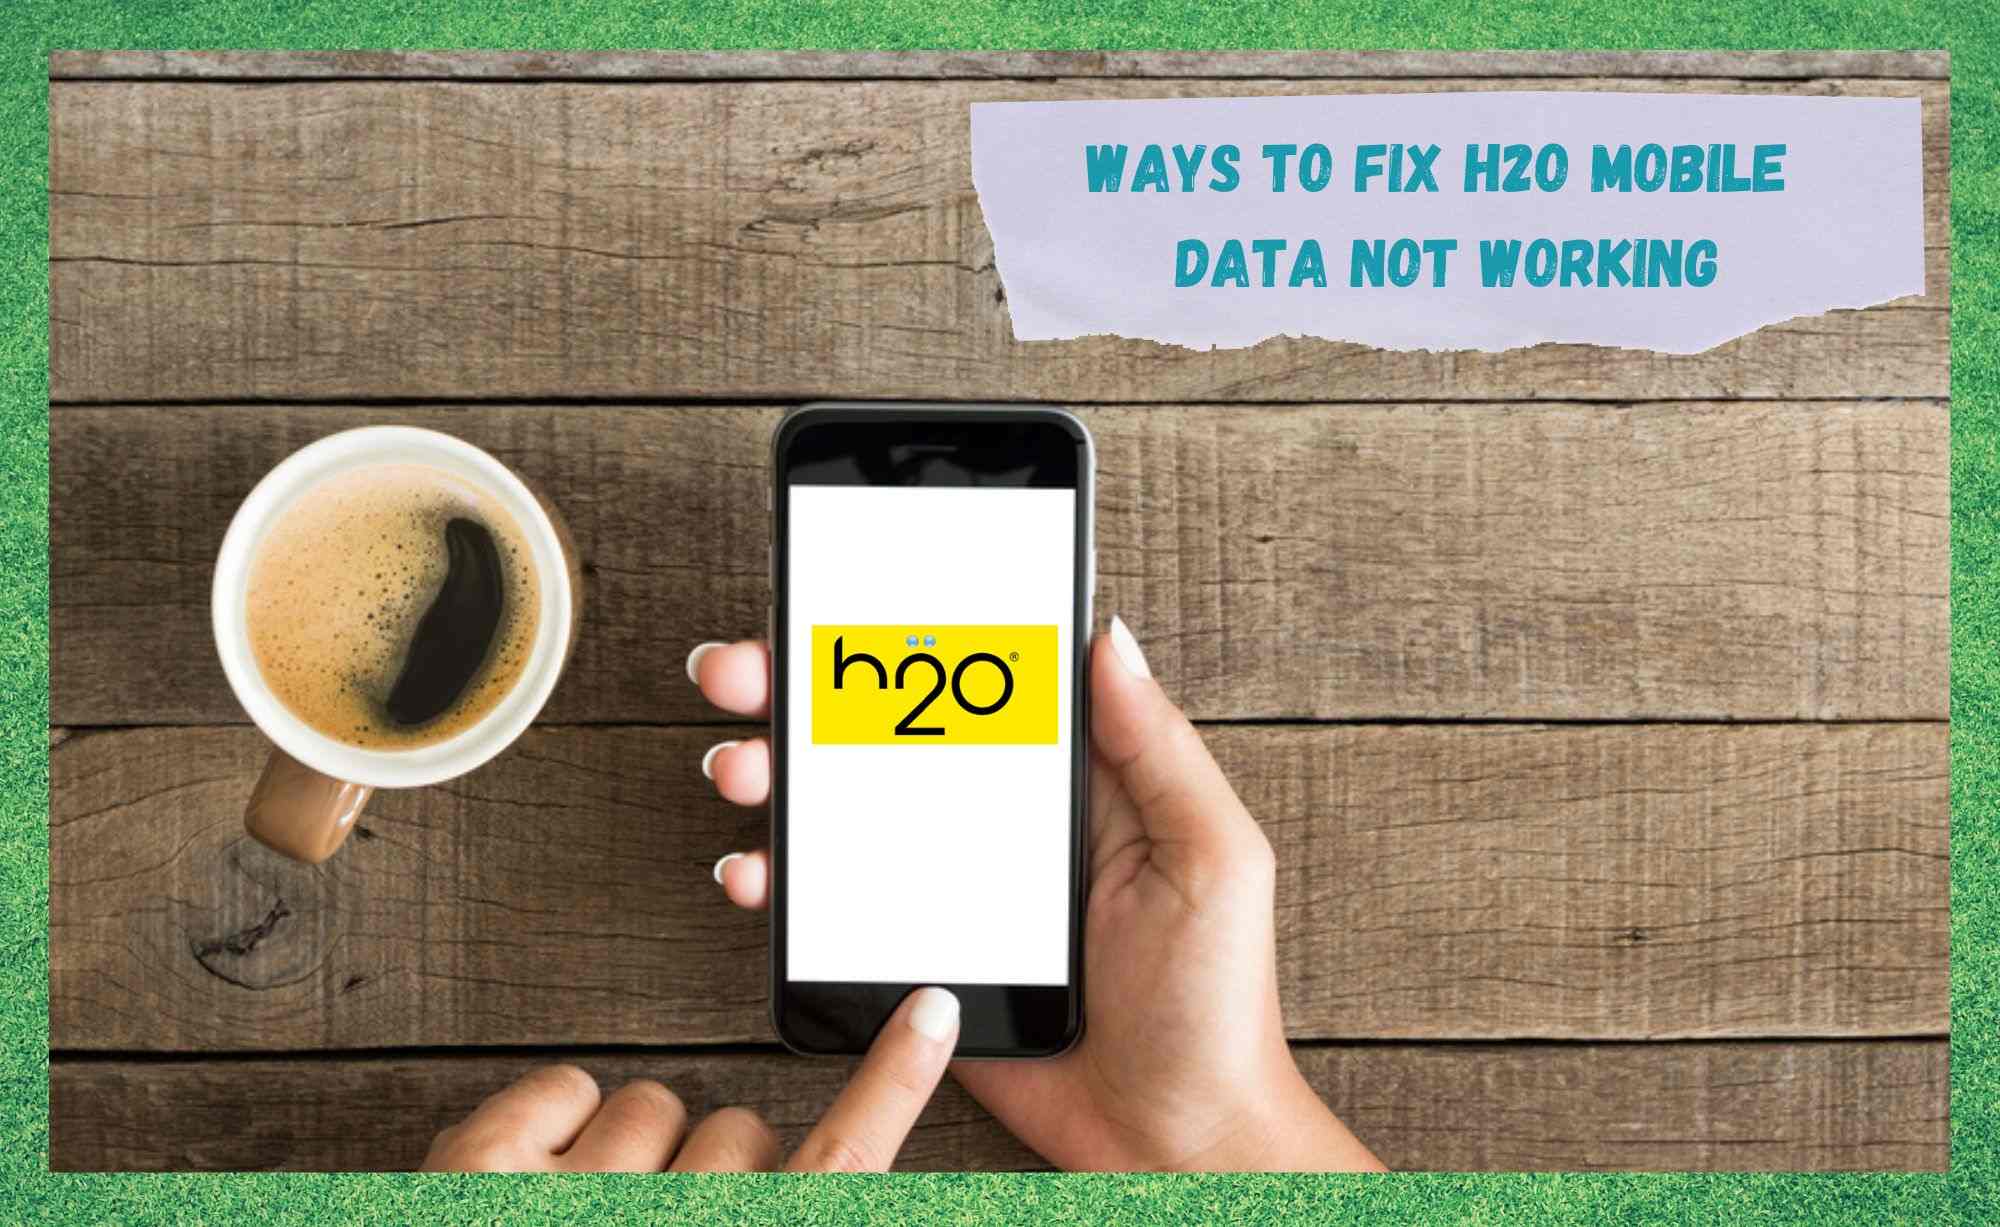 h2o mobile data not working